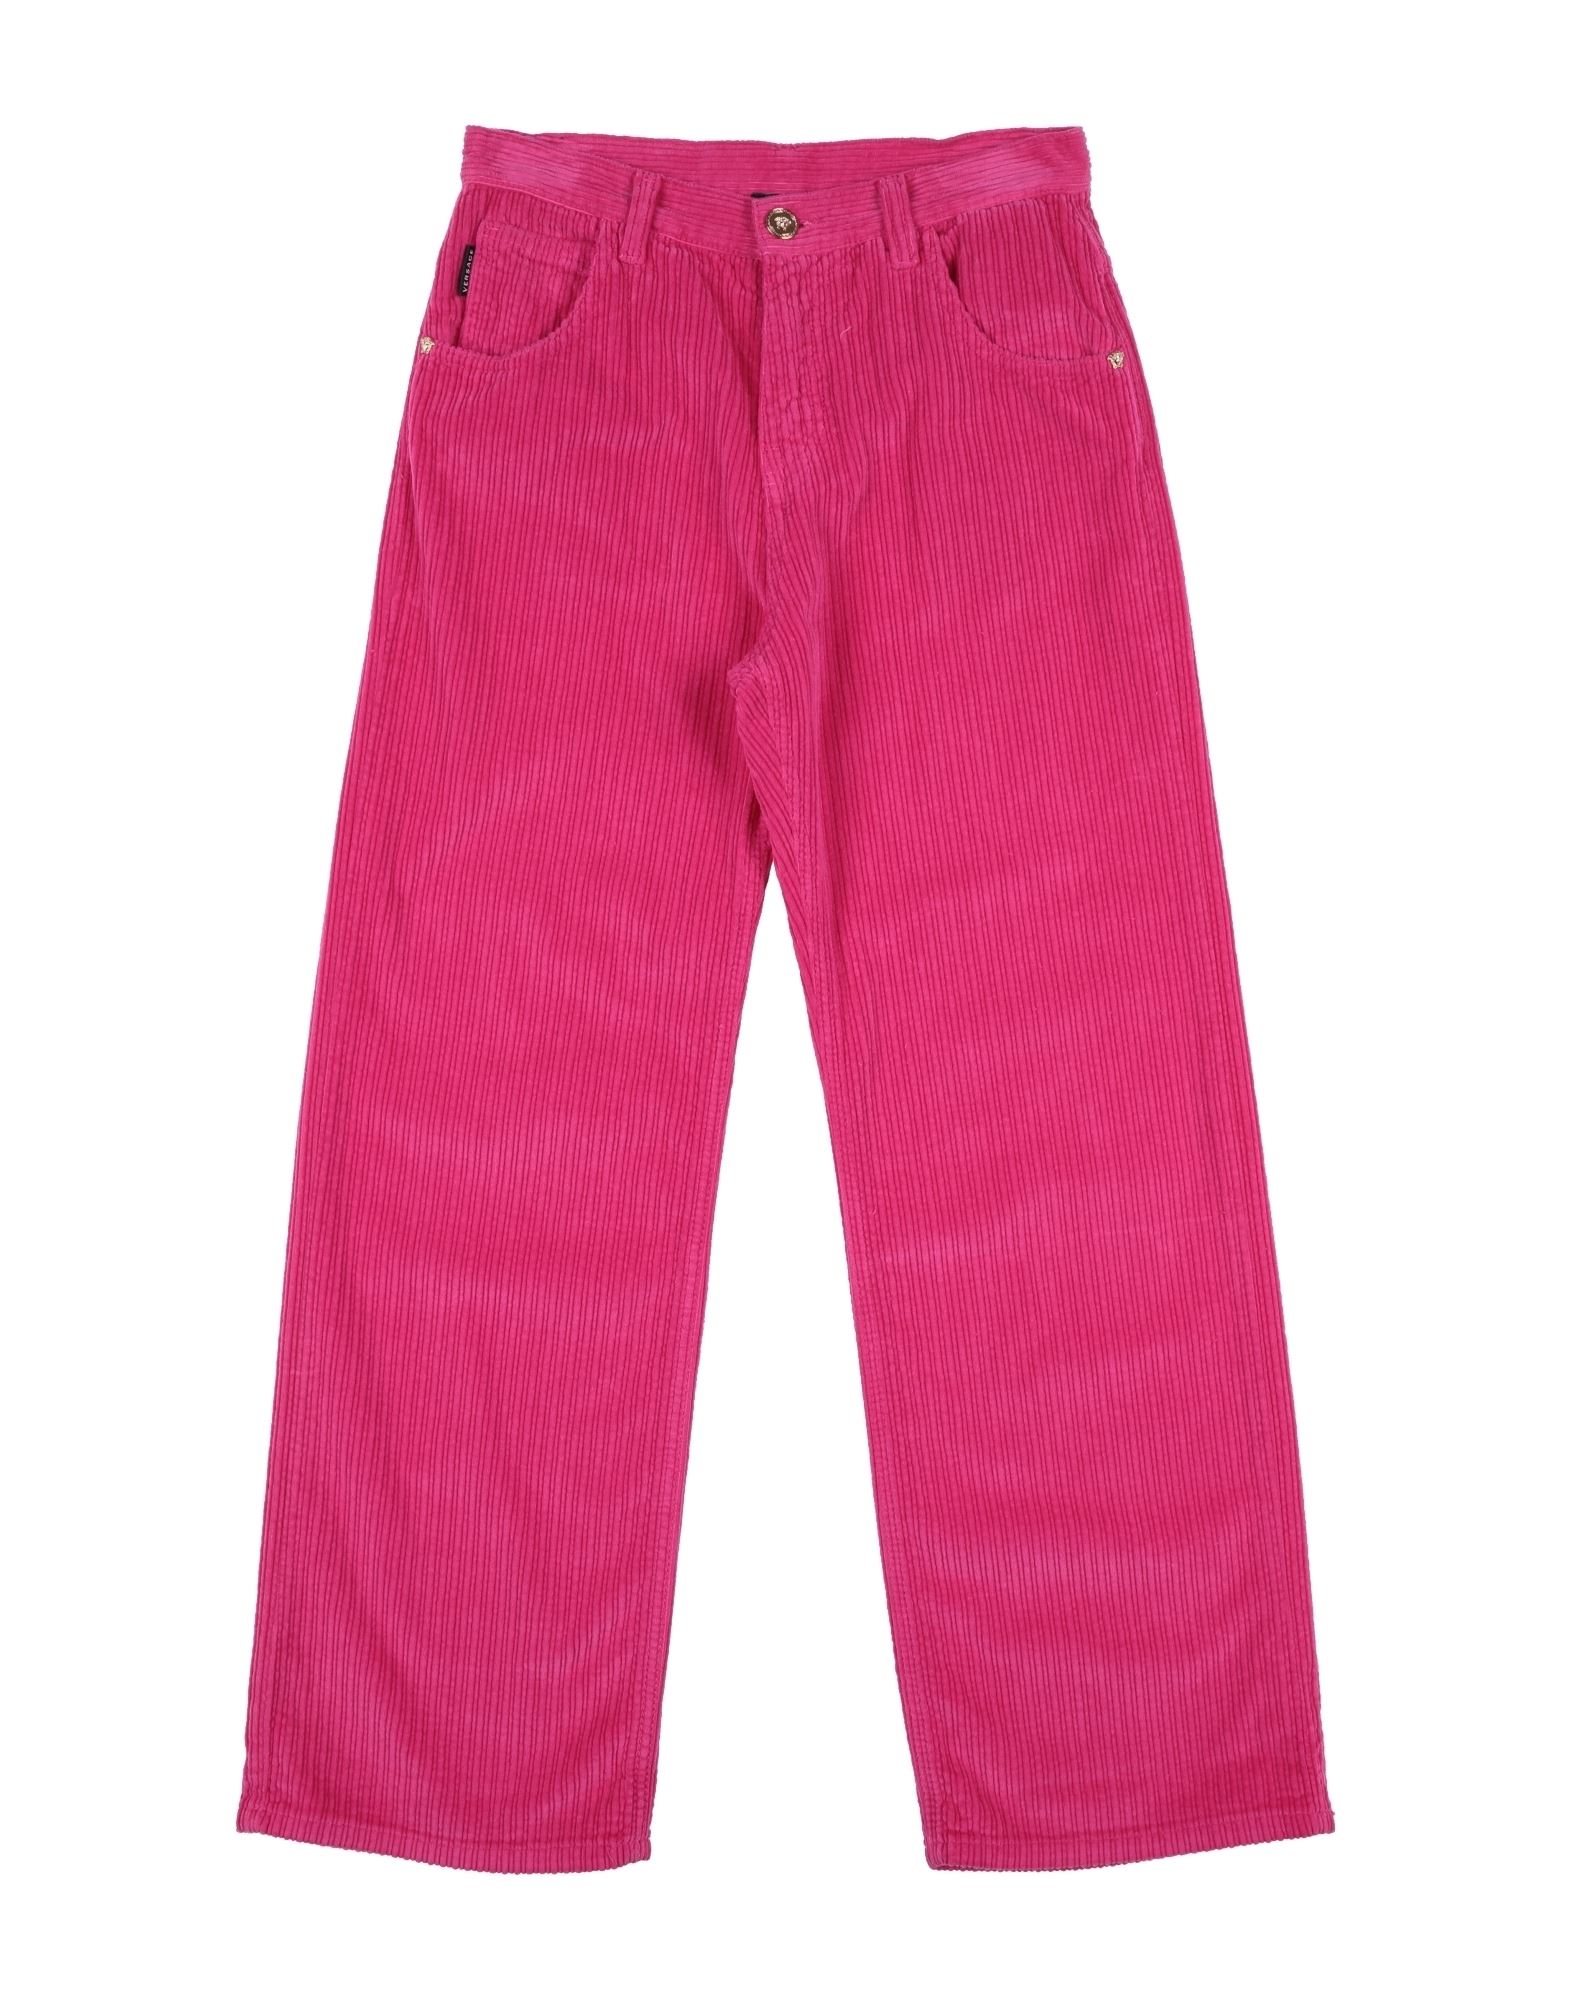 VERSACE YOUNG Hose Kinder Fuchsia von VERSACE YOUNG